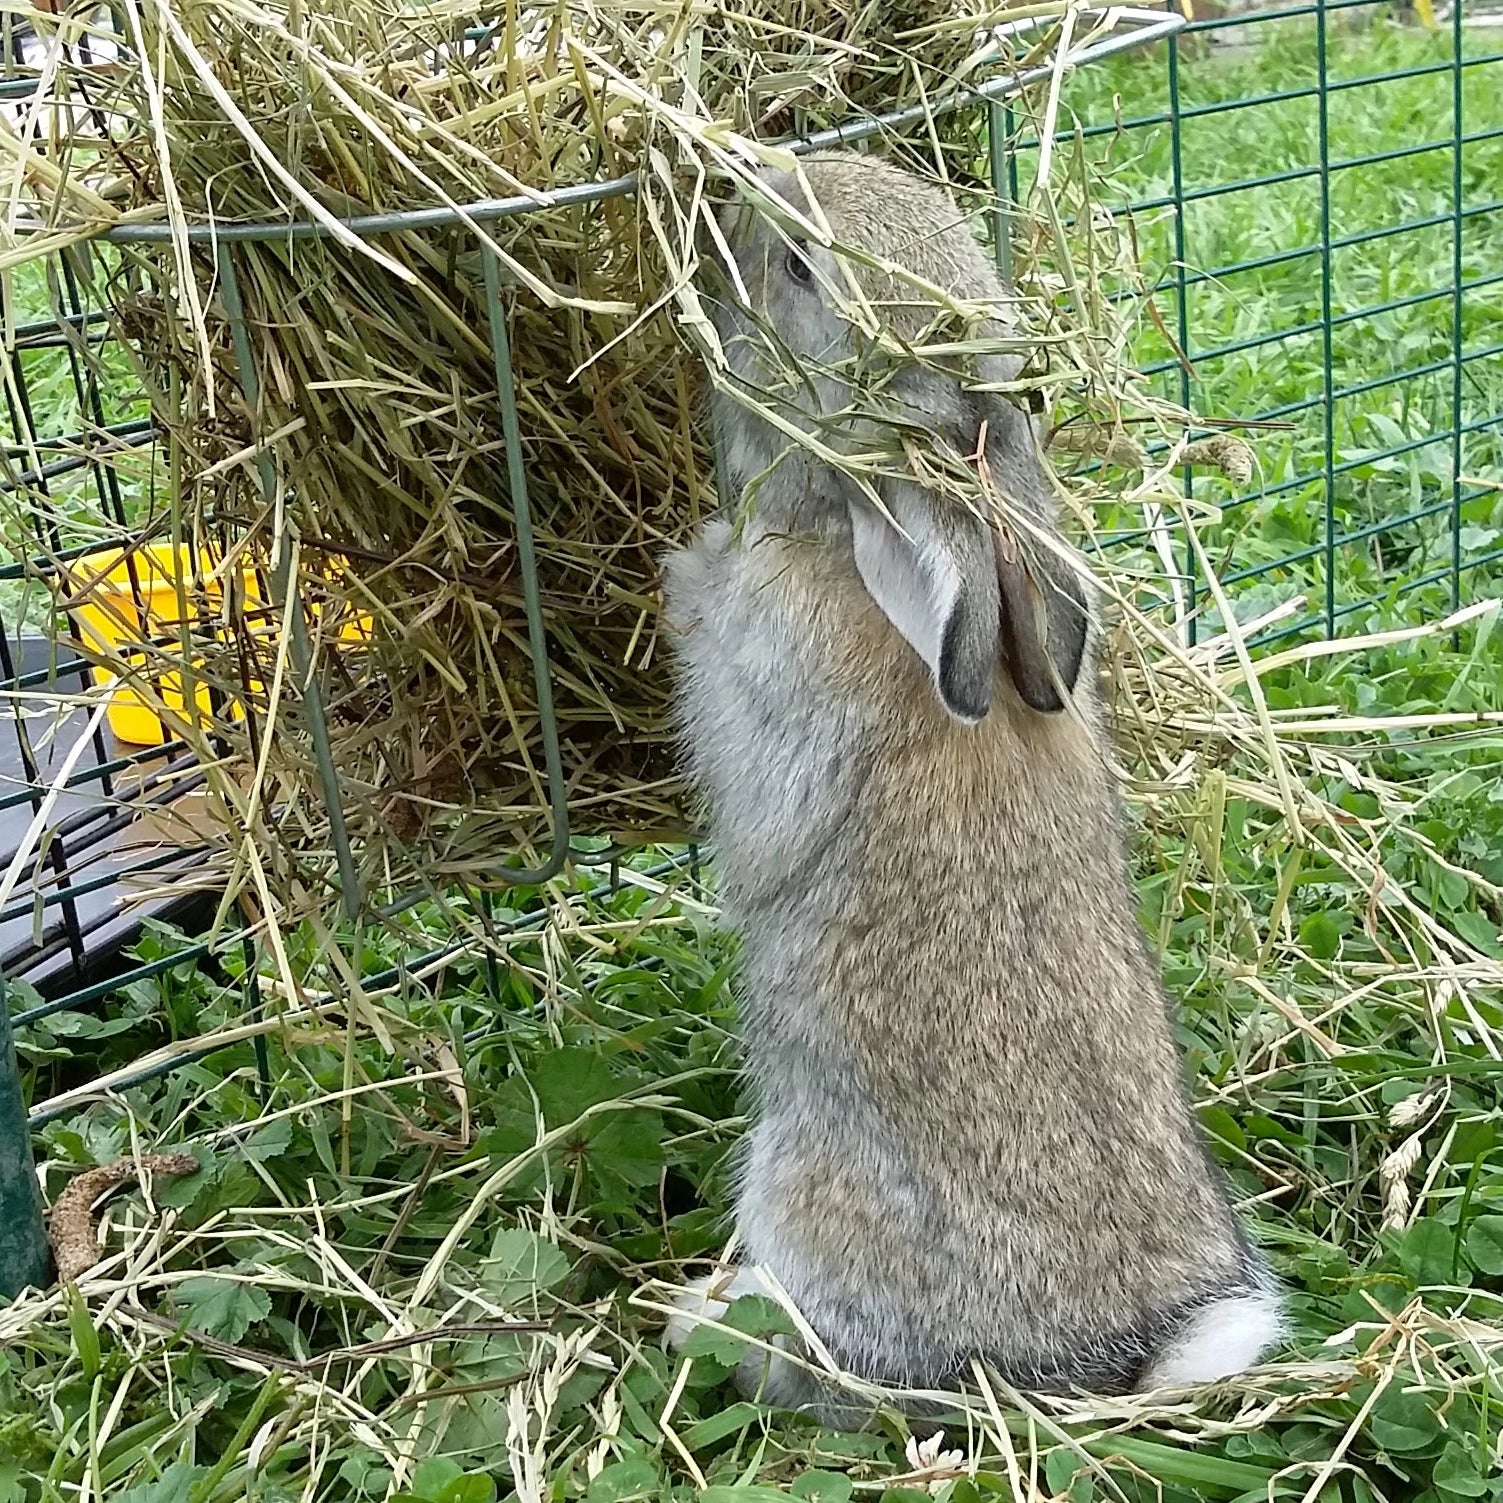 Using a dispenser ensures that your rabbit's hay is kept clean and separate from the bedding hay